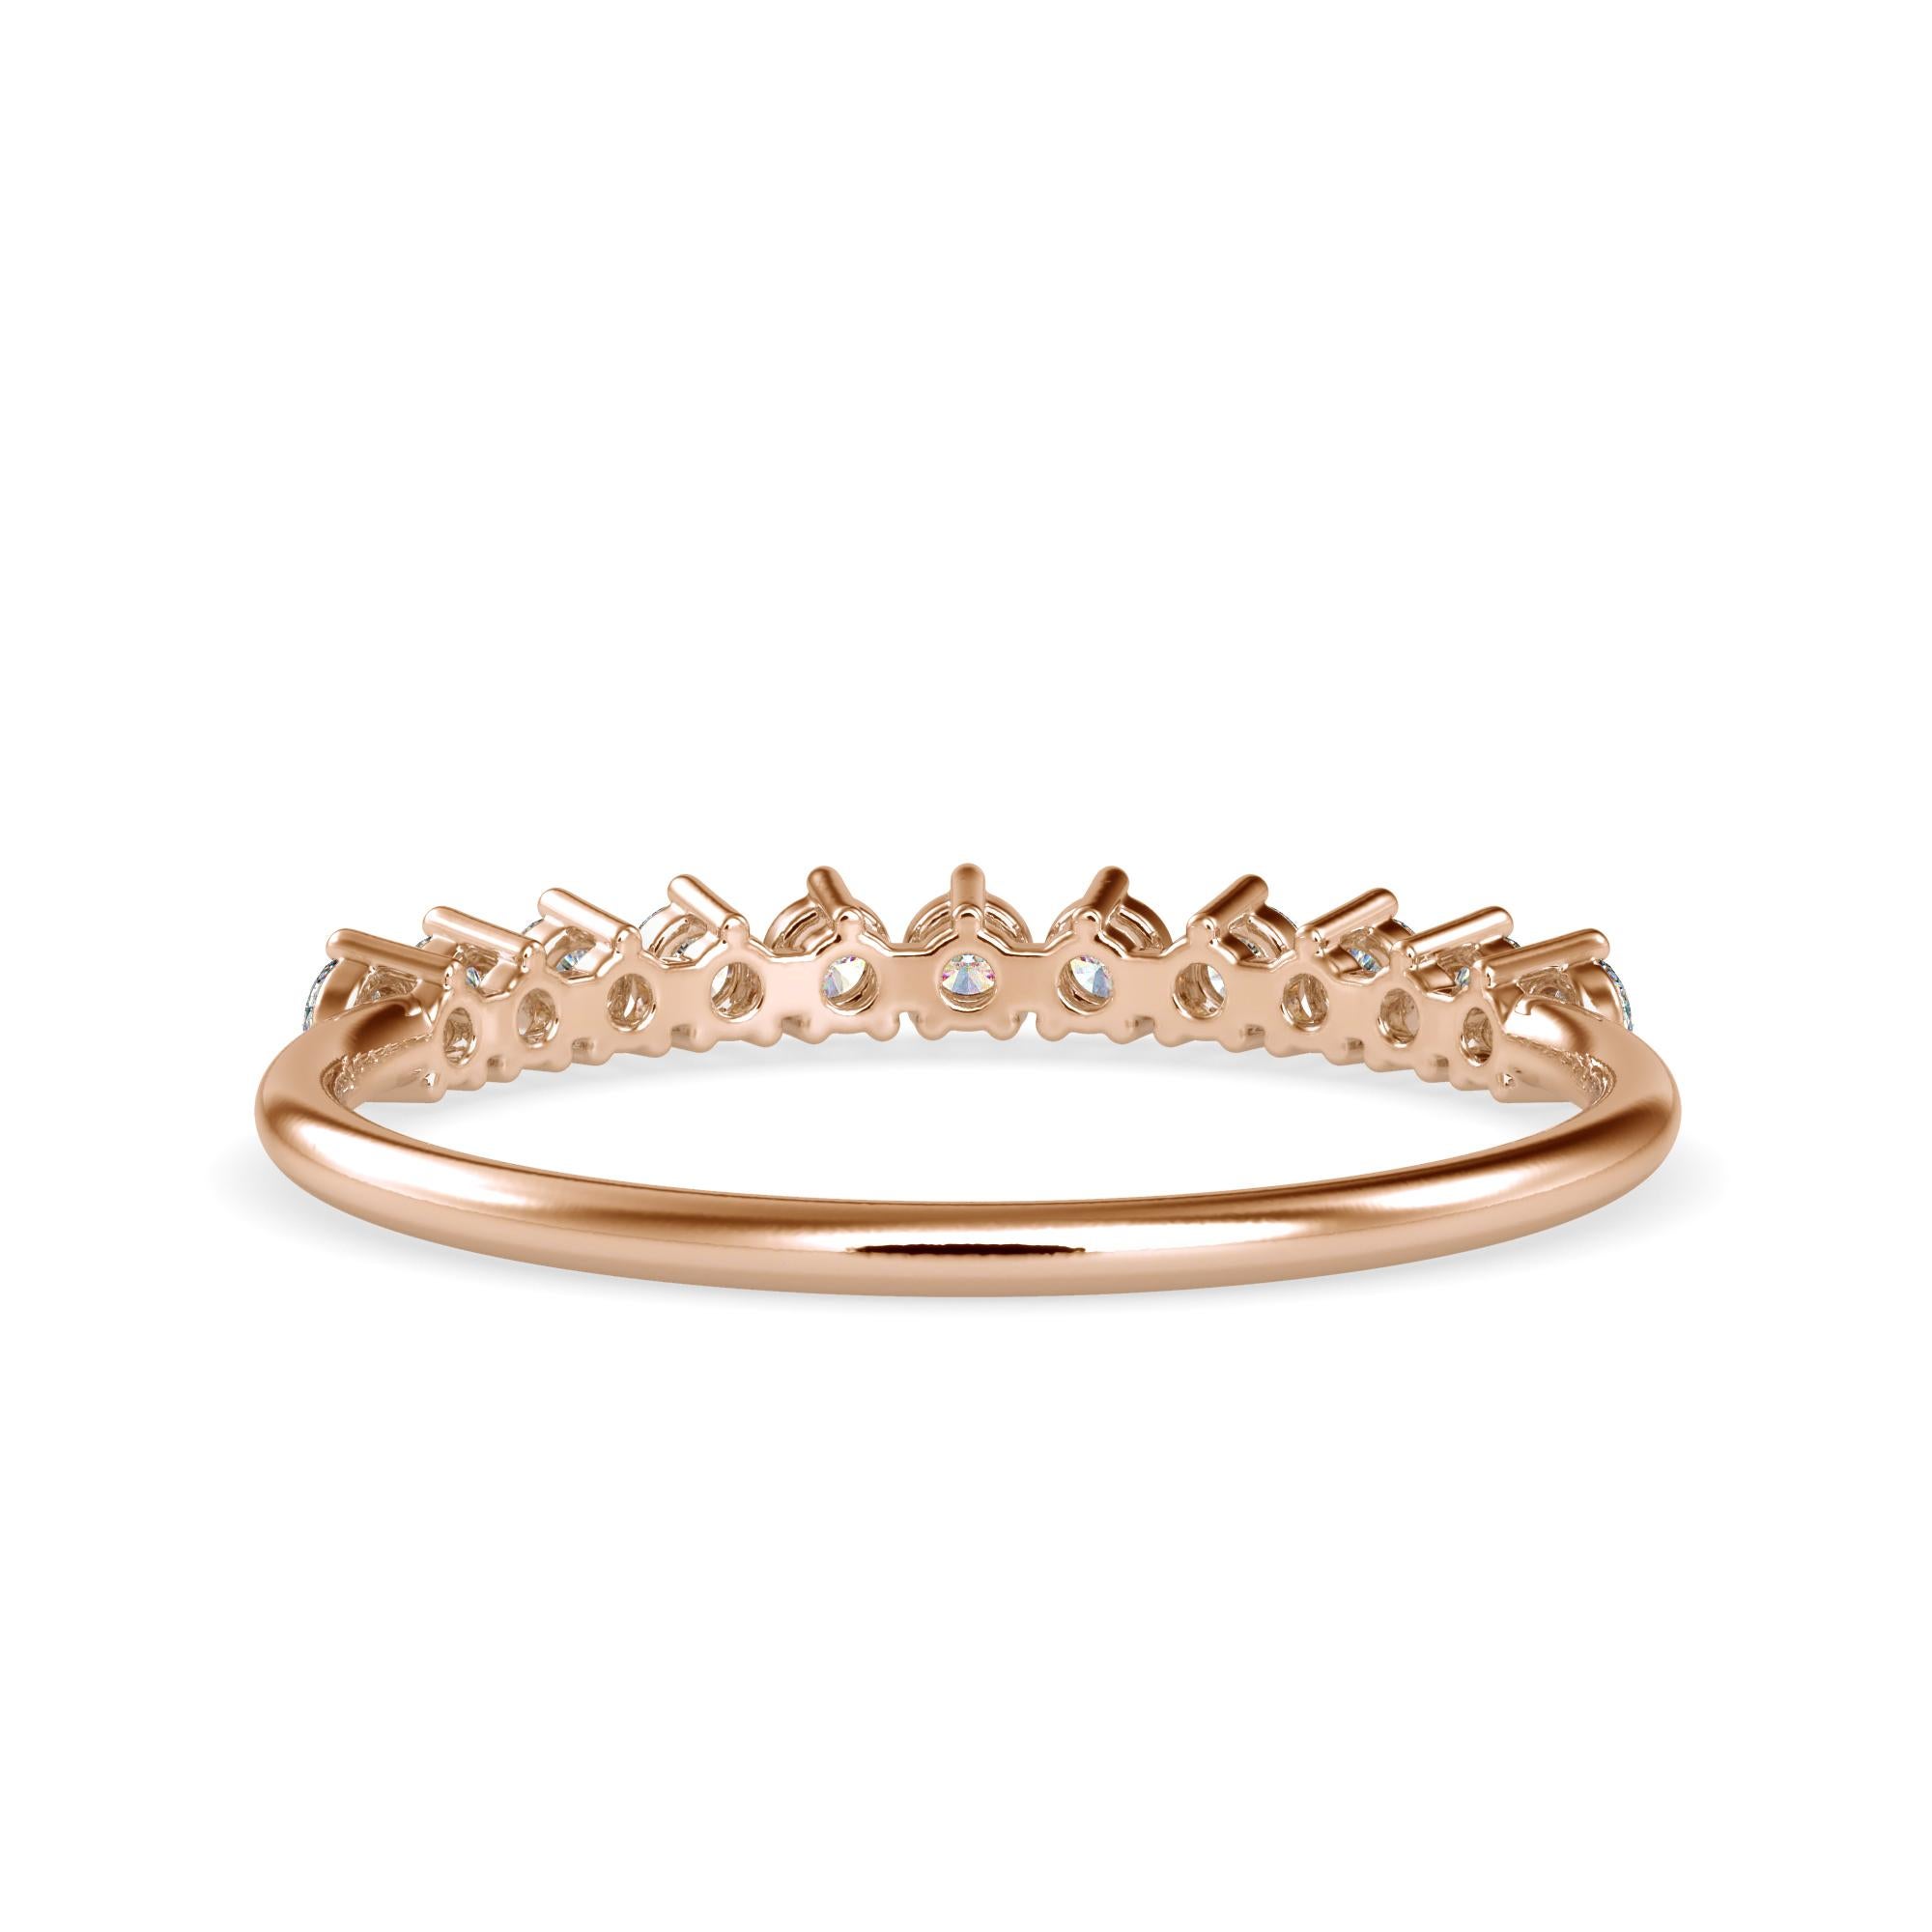 0.24 Carat Diamond 14K Rose Gold Ring
Stamped: 14K
Total Ring Weight: 1.2 Grams
Diamond Weight: 0.24 Carat (F-G Color, VS2-SI1 Clarity) 1.8 Millimeters 
Diamond Quantity: 11
SKU: [500019]
